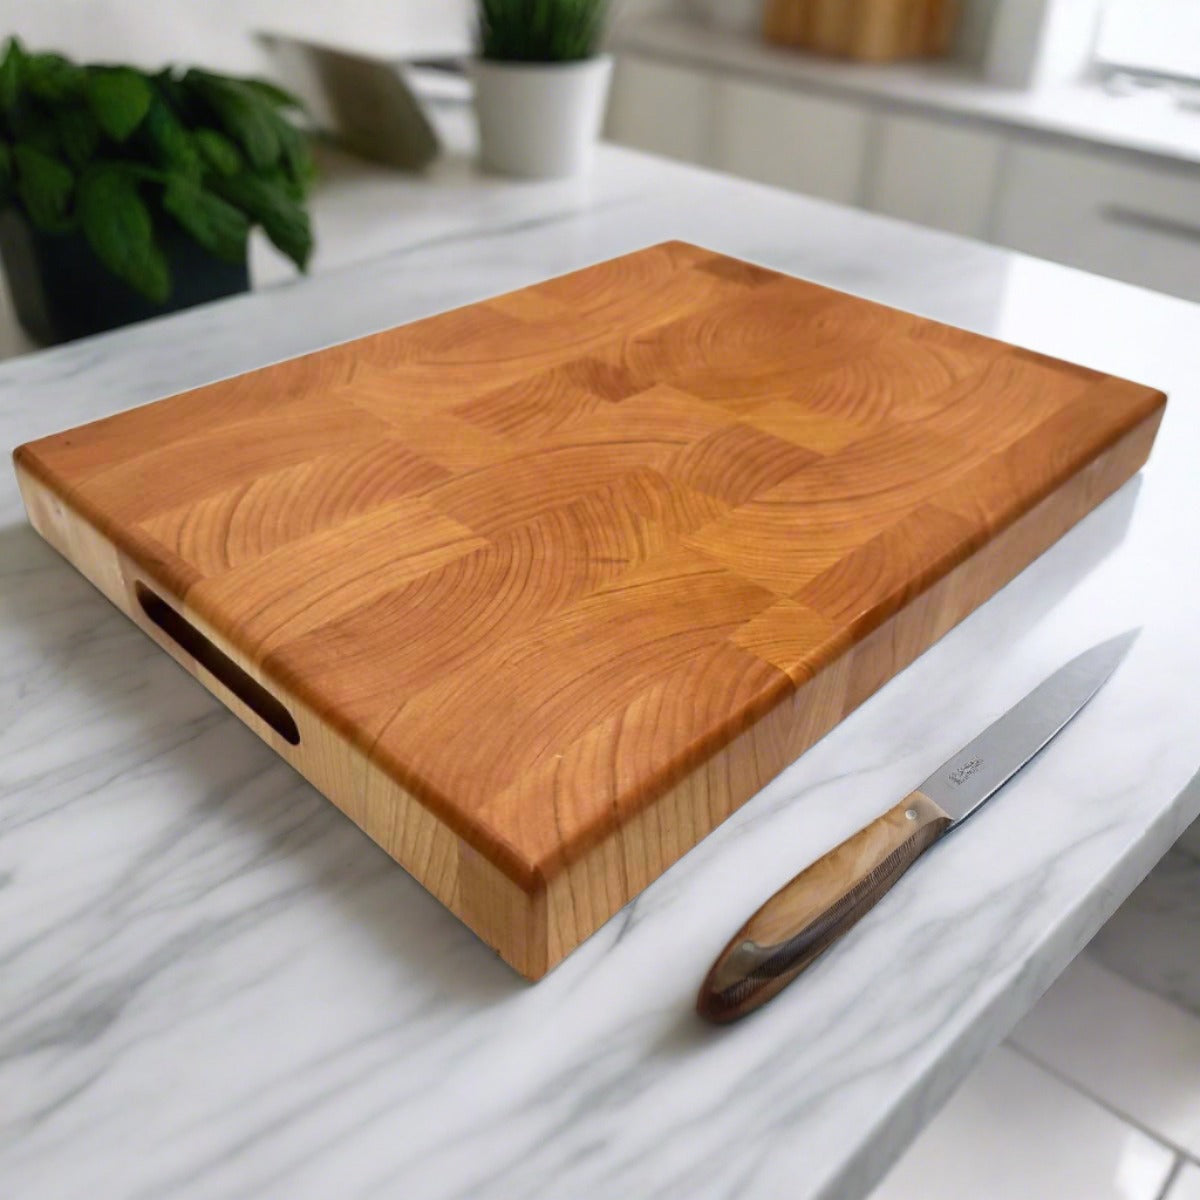 Cherry End Grain Chaos Cutting Board "The Price"